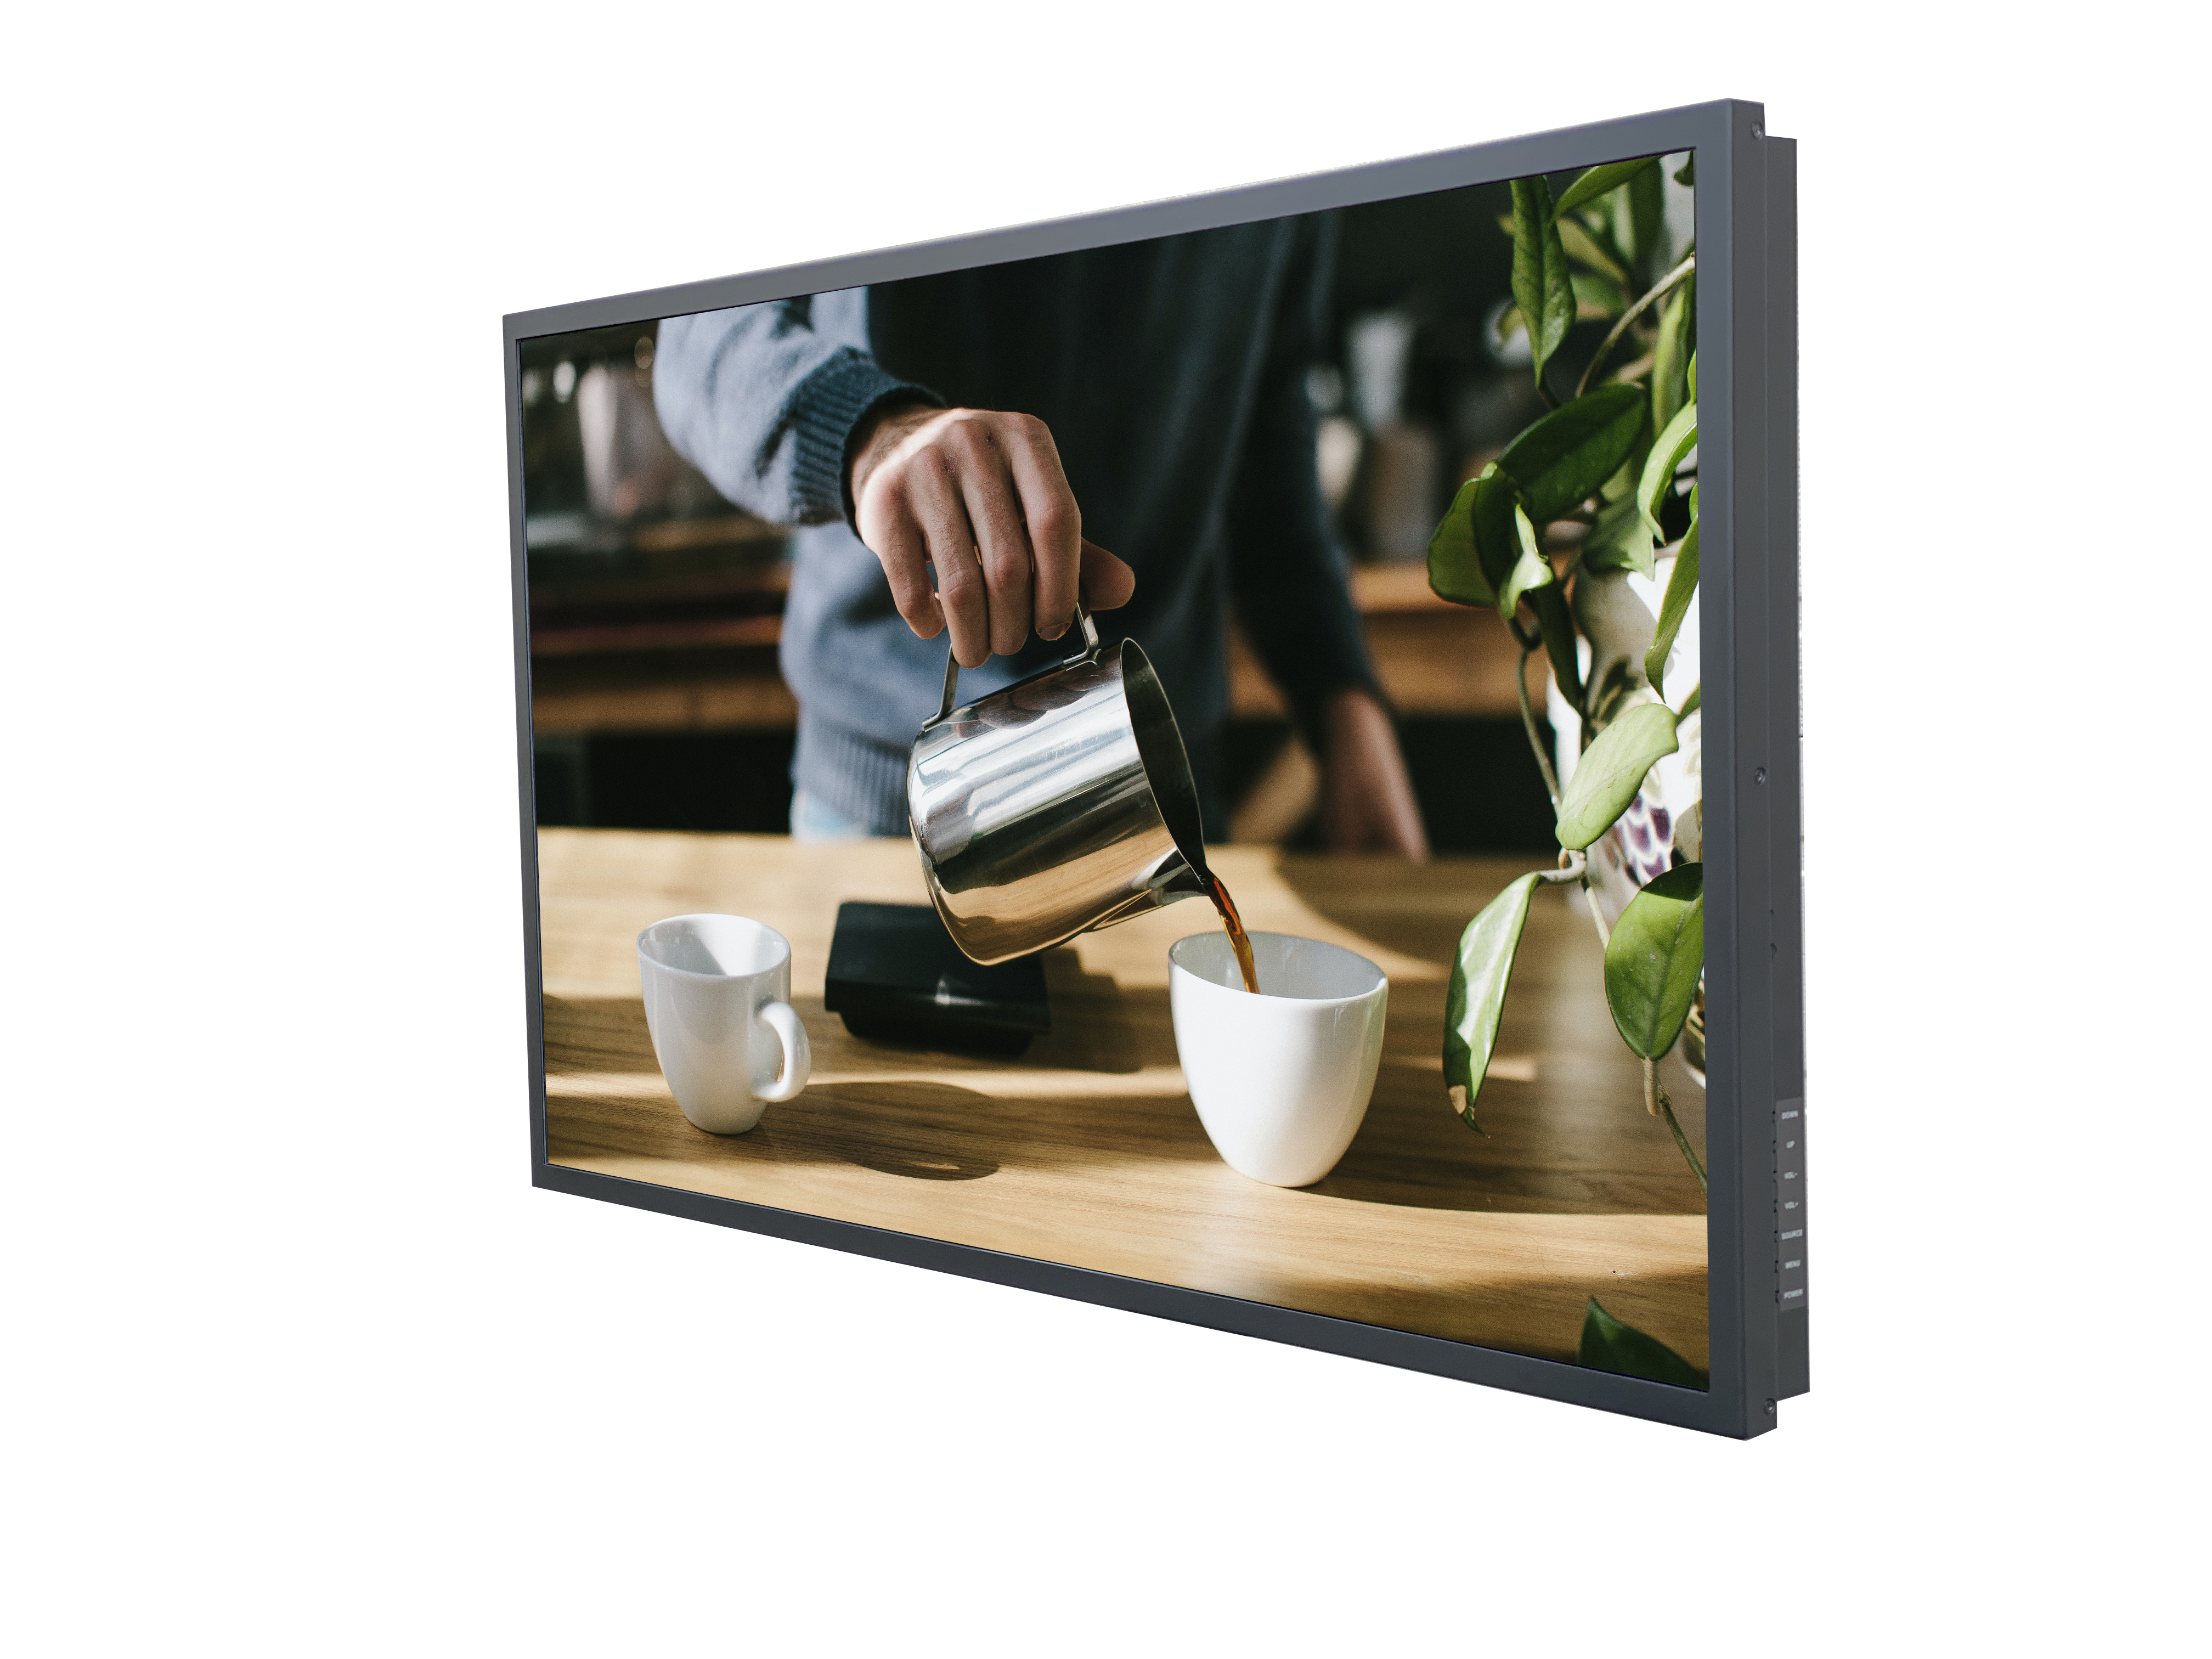 A DK commercial display with someone pouring coffee into a cup on it.